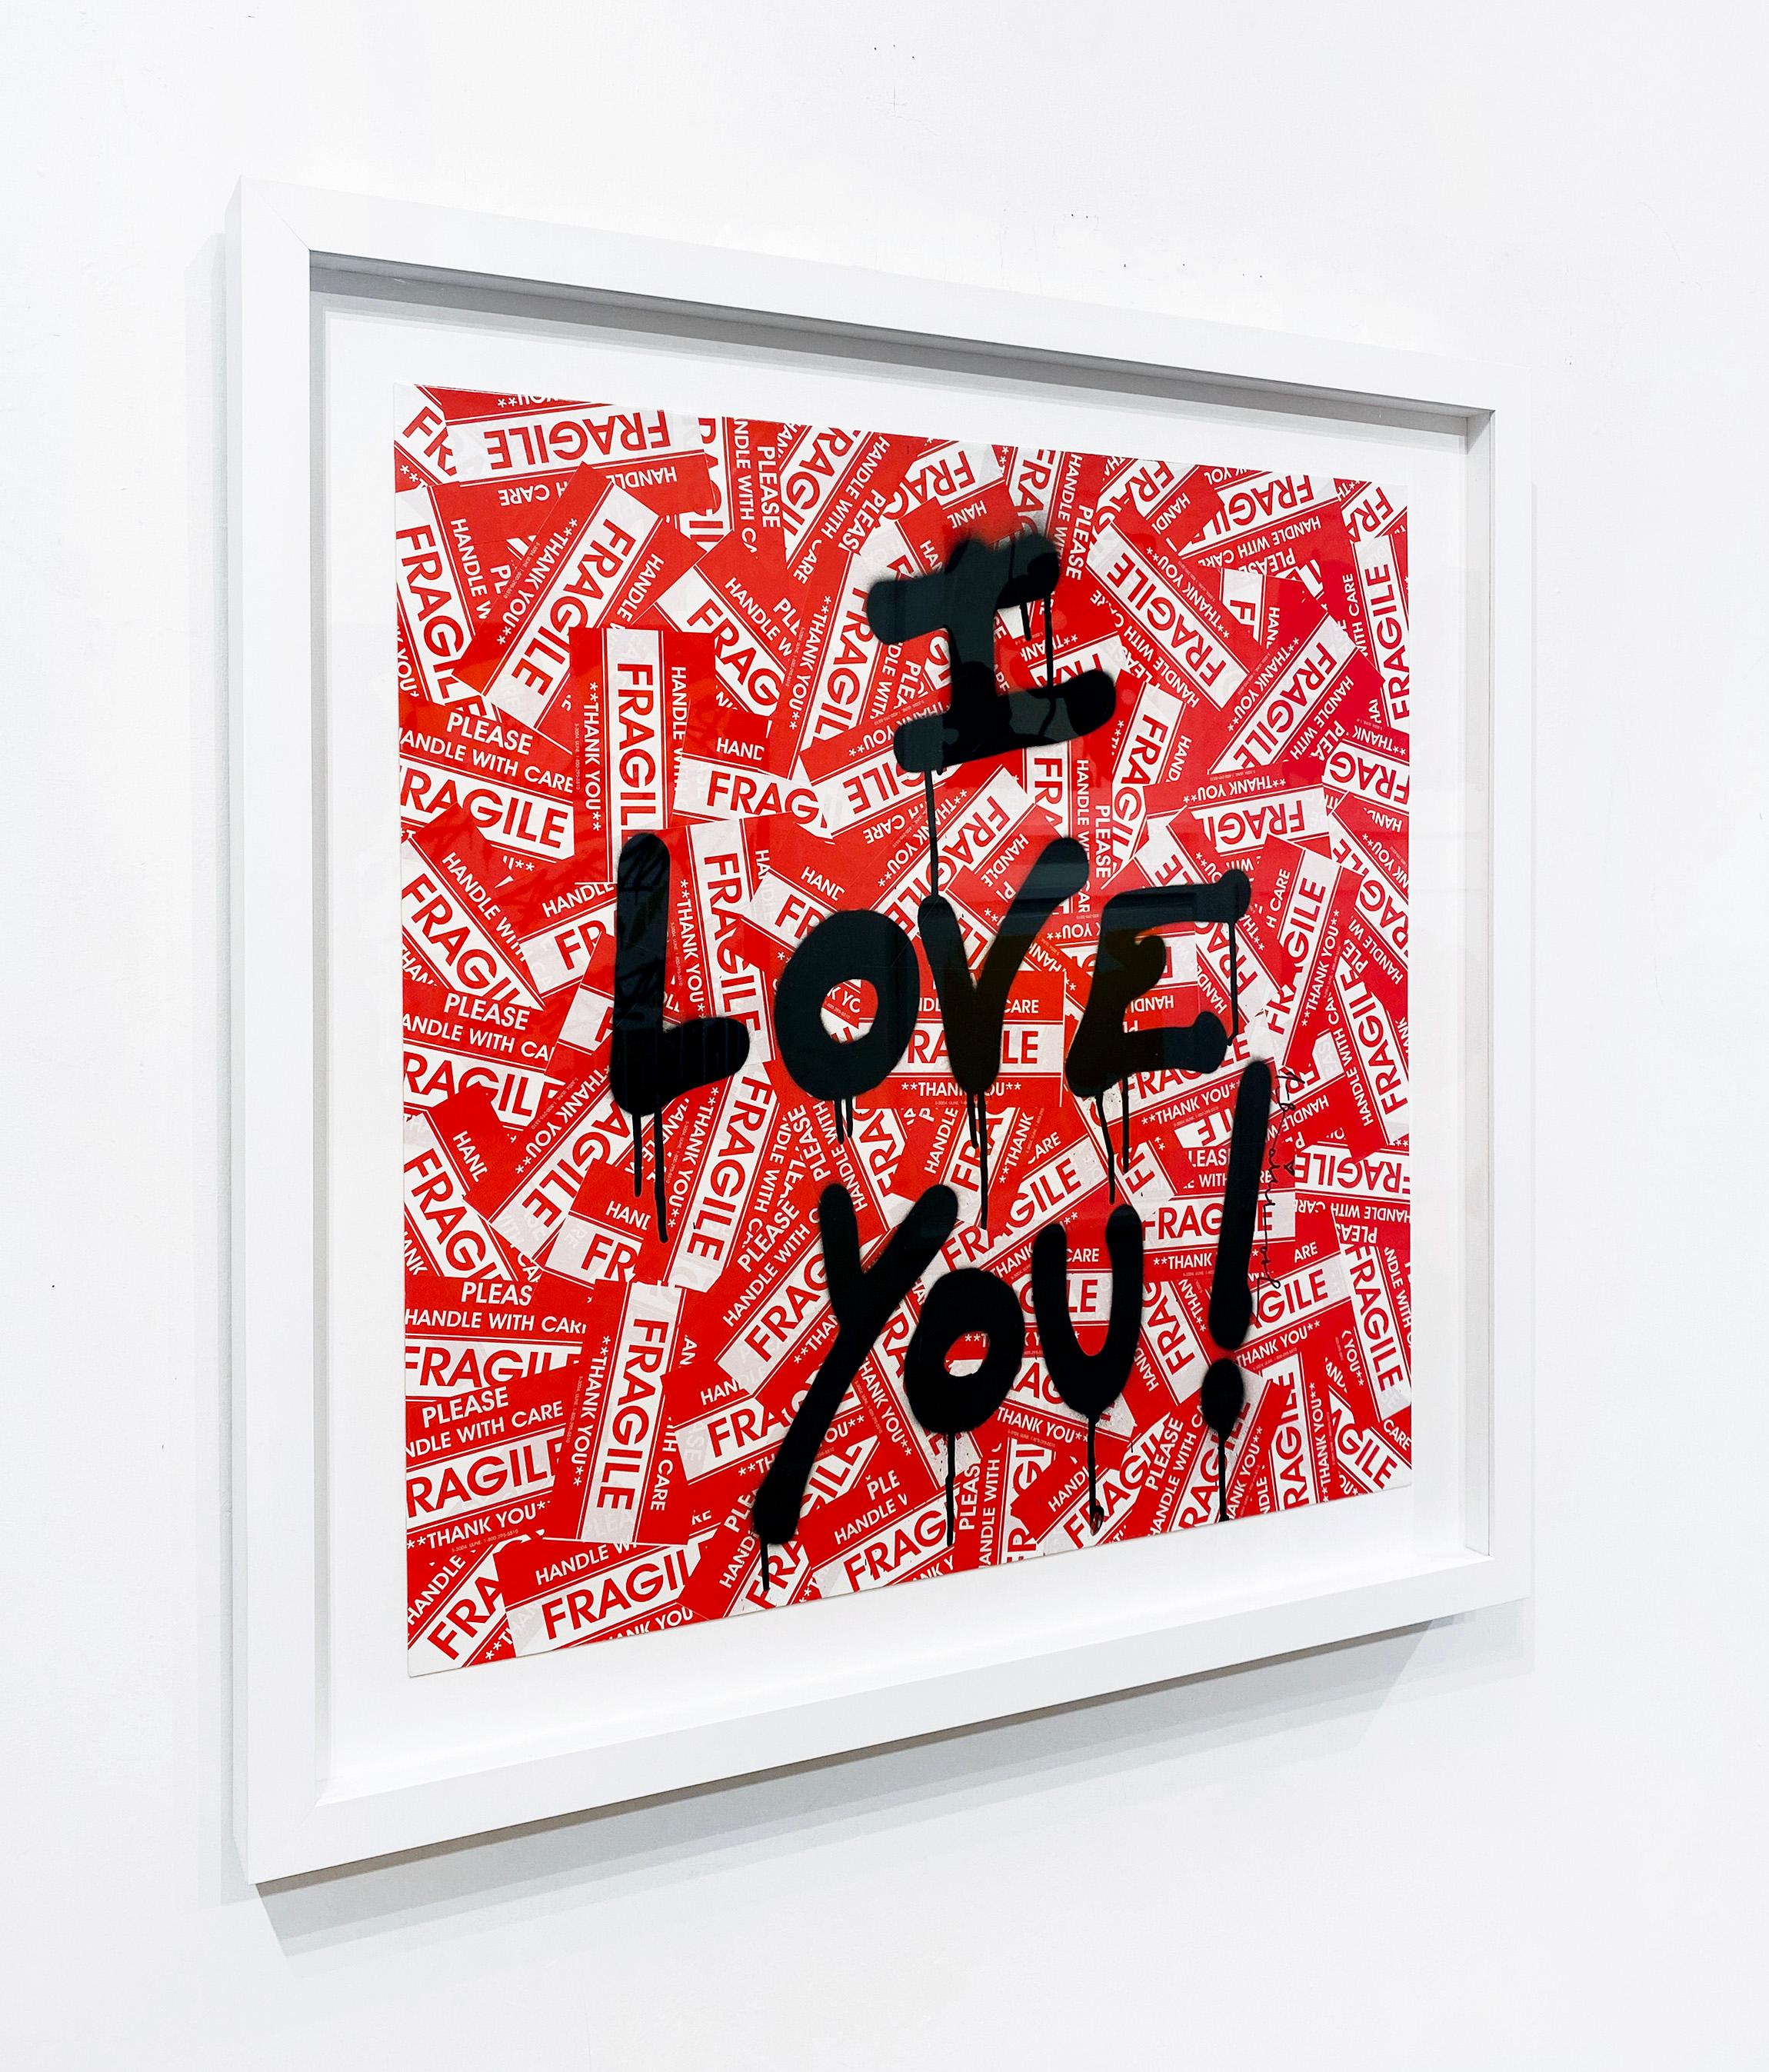 Artist:  Brainwash, Mr.
Title:  I Love You
Series:  I Love You
Date:  2022
Medium:  Spray Paint and Stickers on Paper
Unframed Dimensions:  24